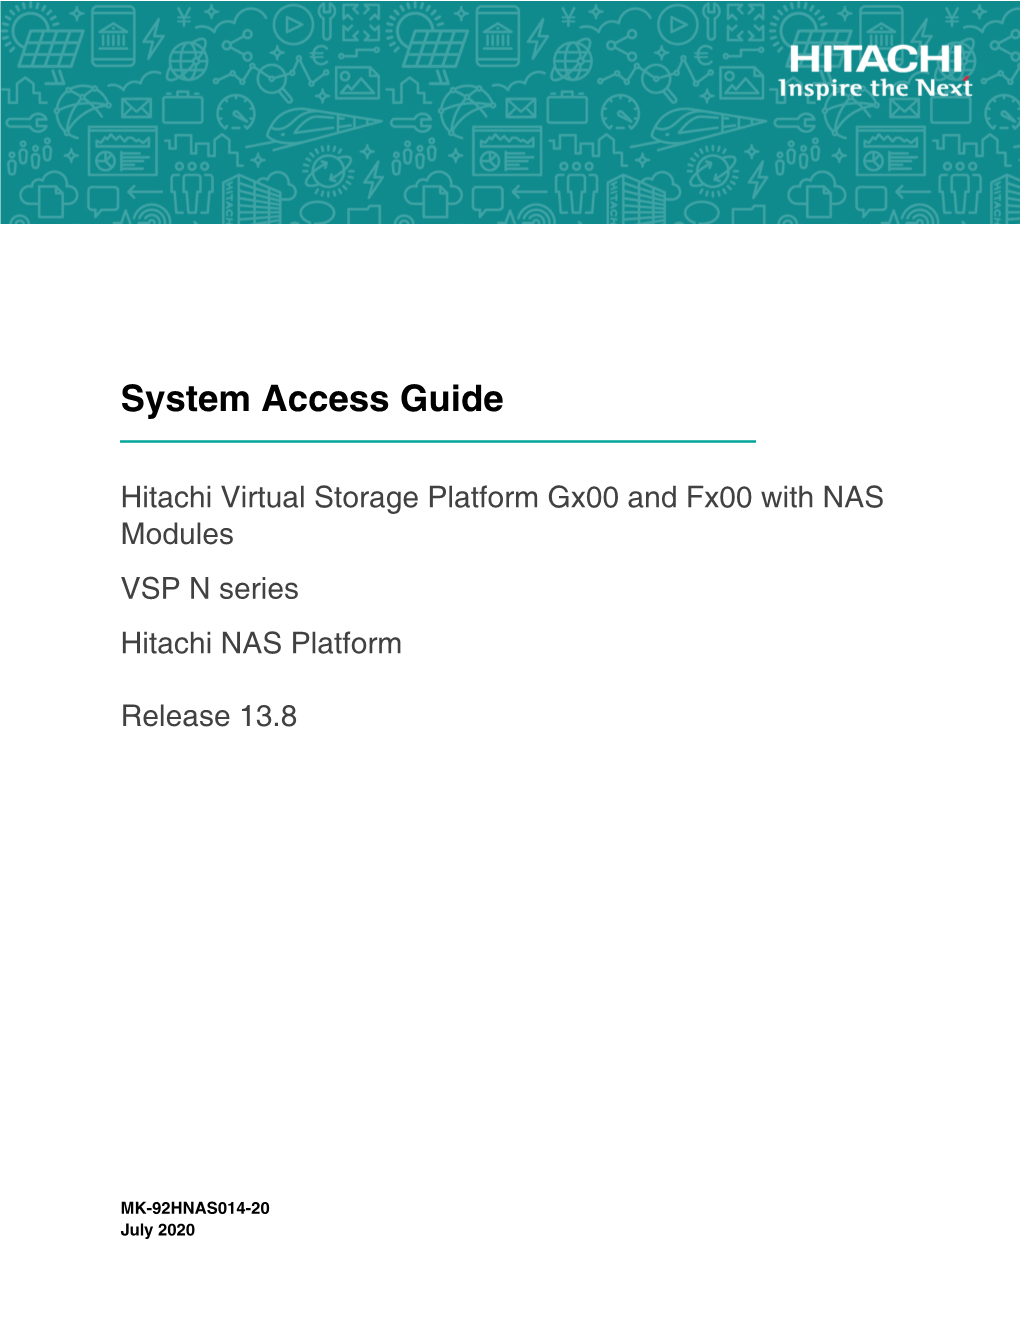 System Access Guide for Hitachi NAS Platform 2 Contents